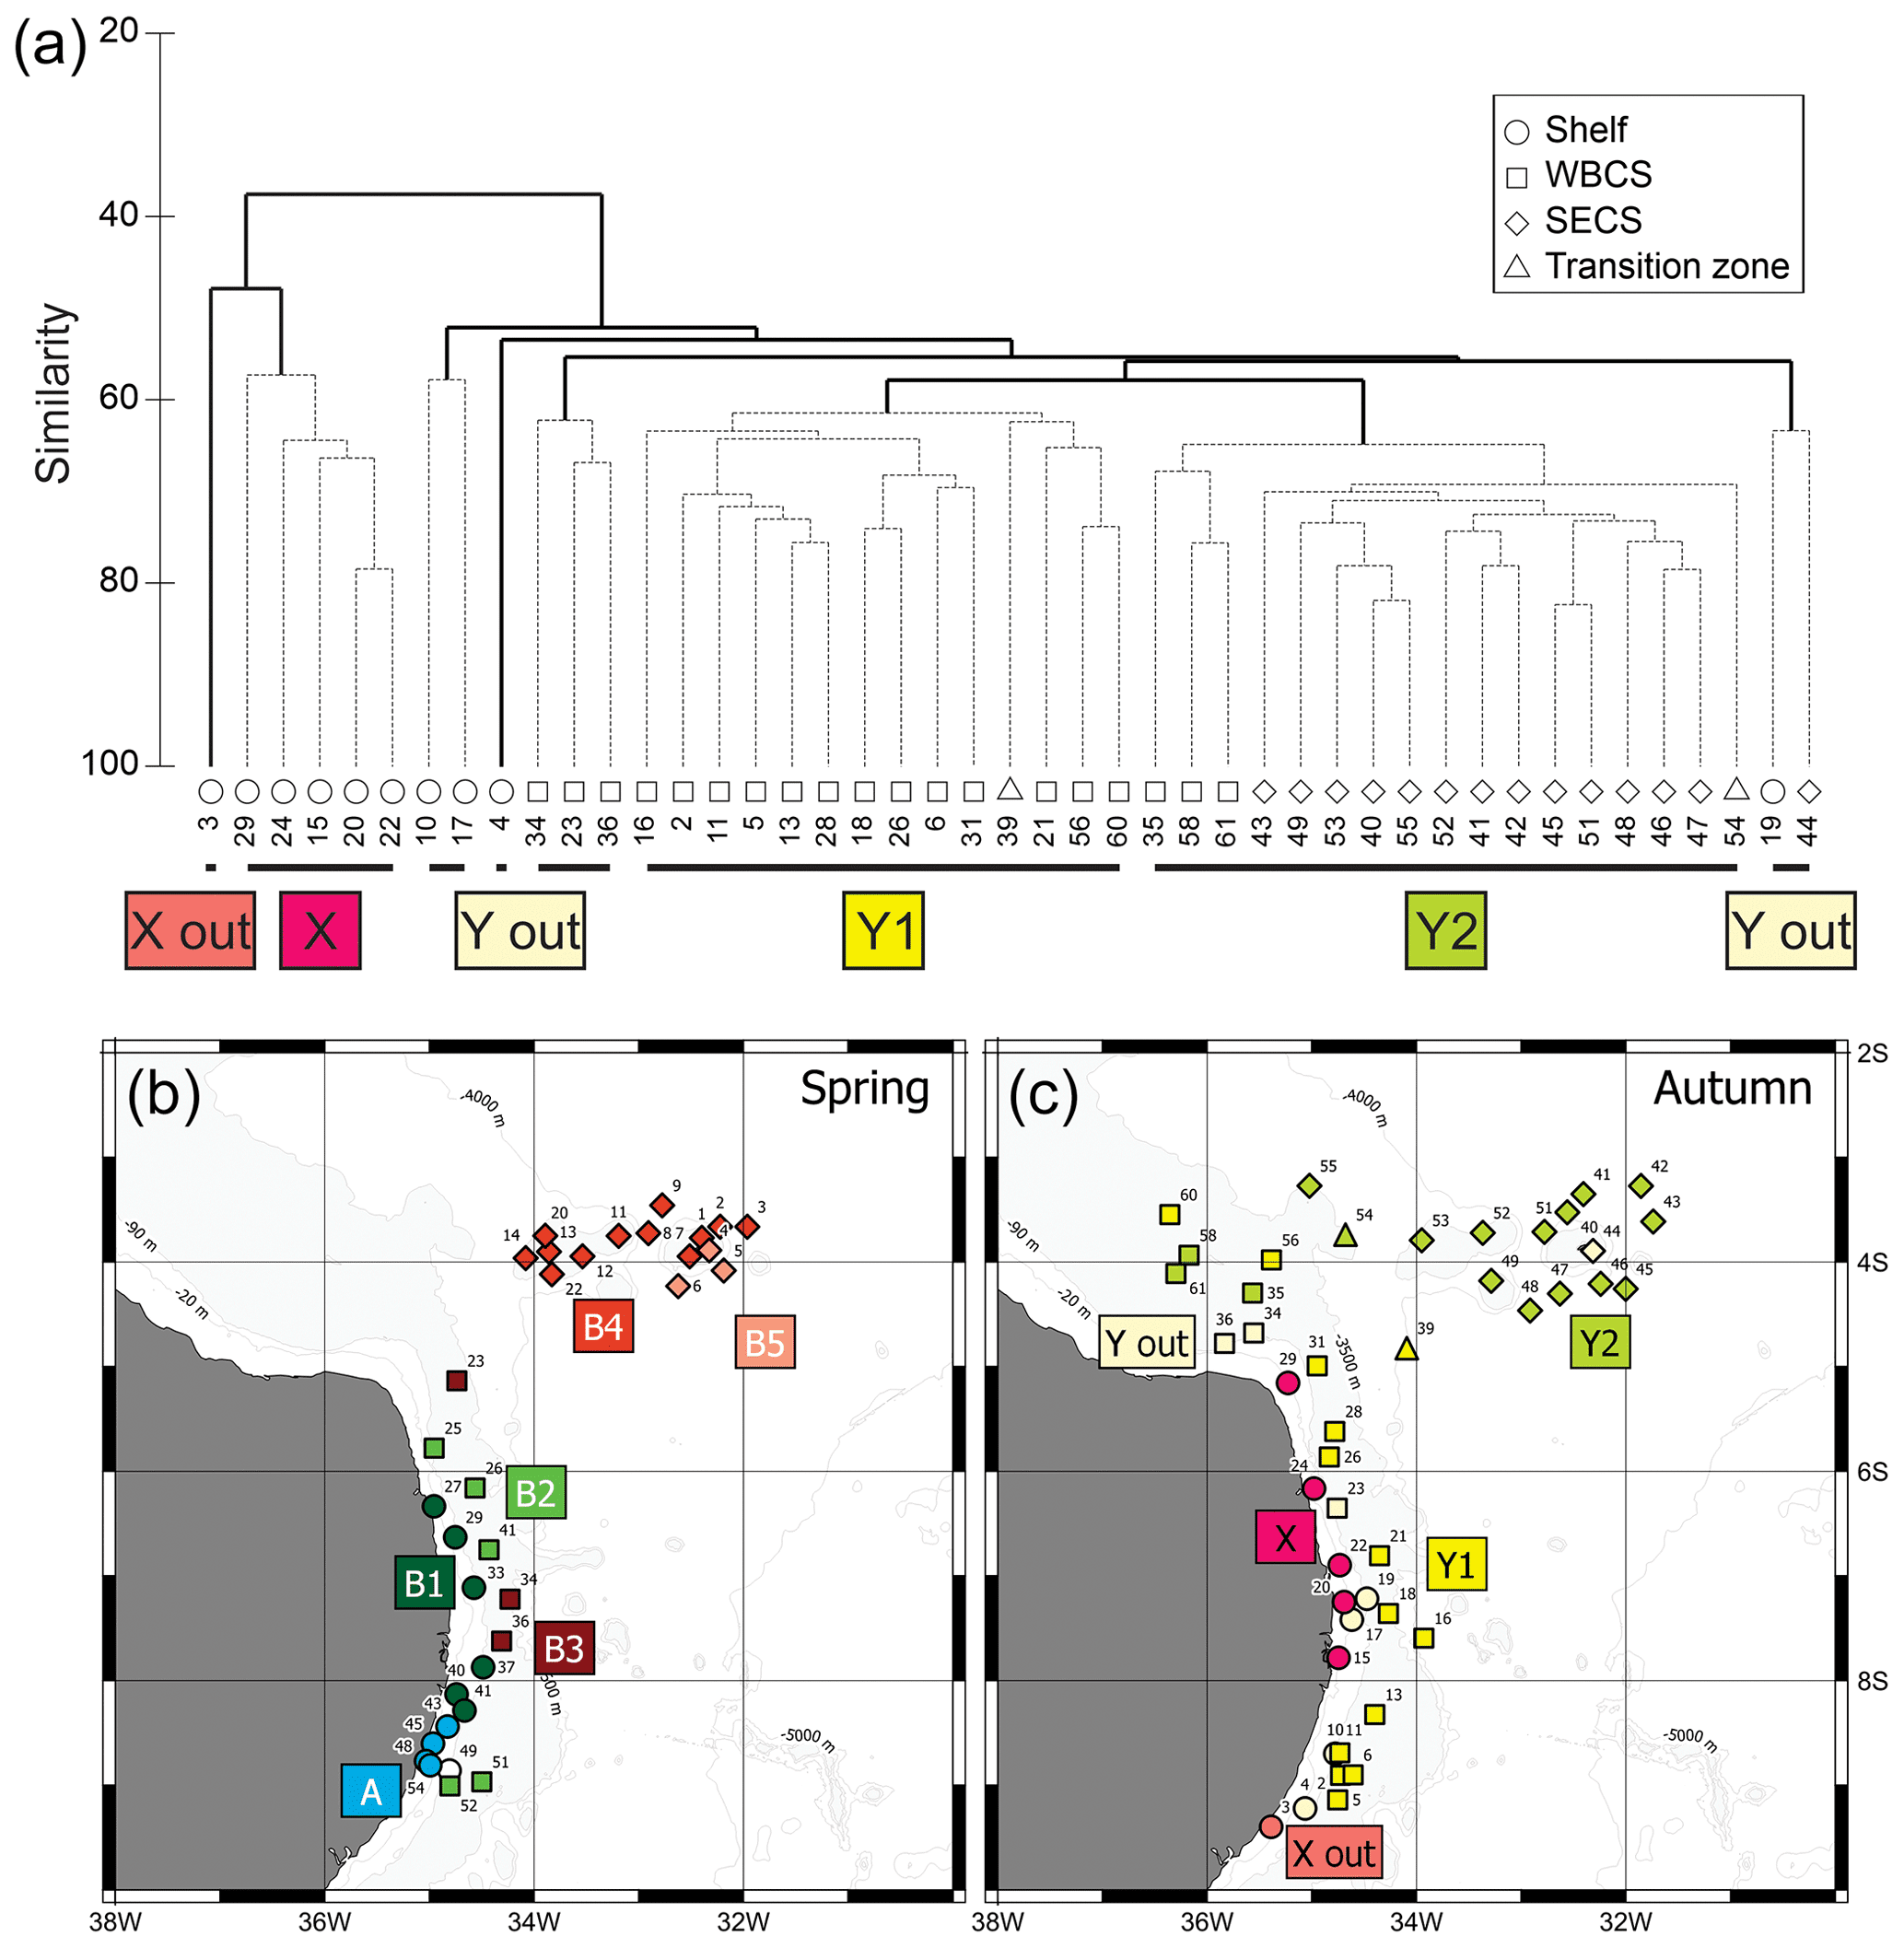 Planktonic cnidarian responses to contrasting thermohaline and circulation seasonal scenarios in a tropical western boundary current system